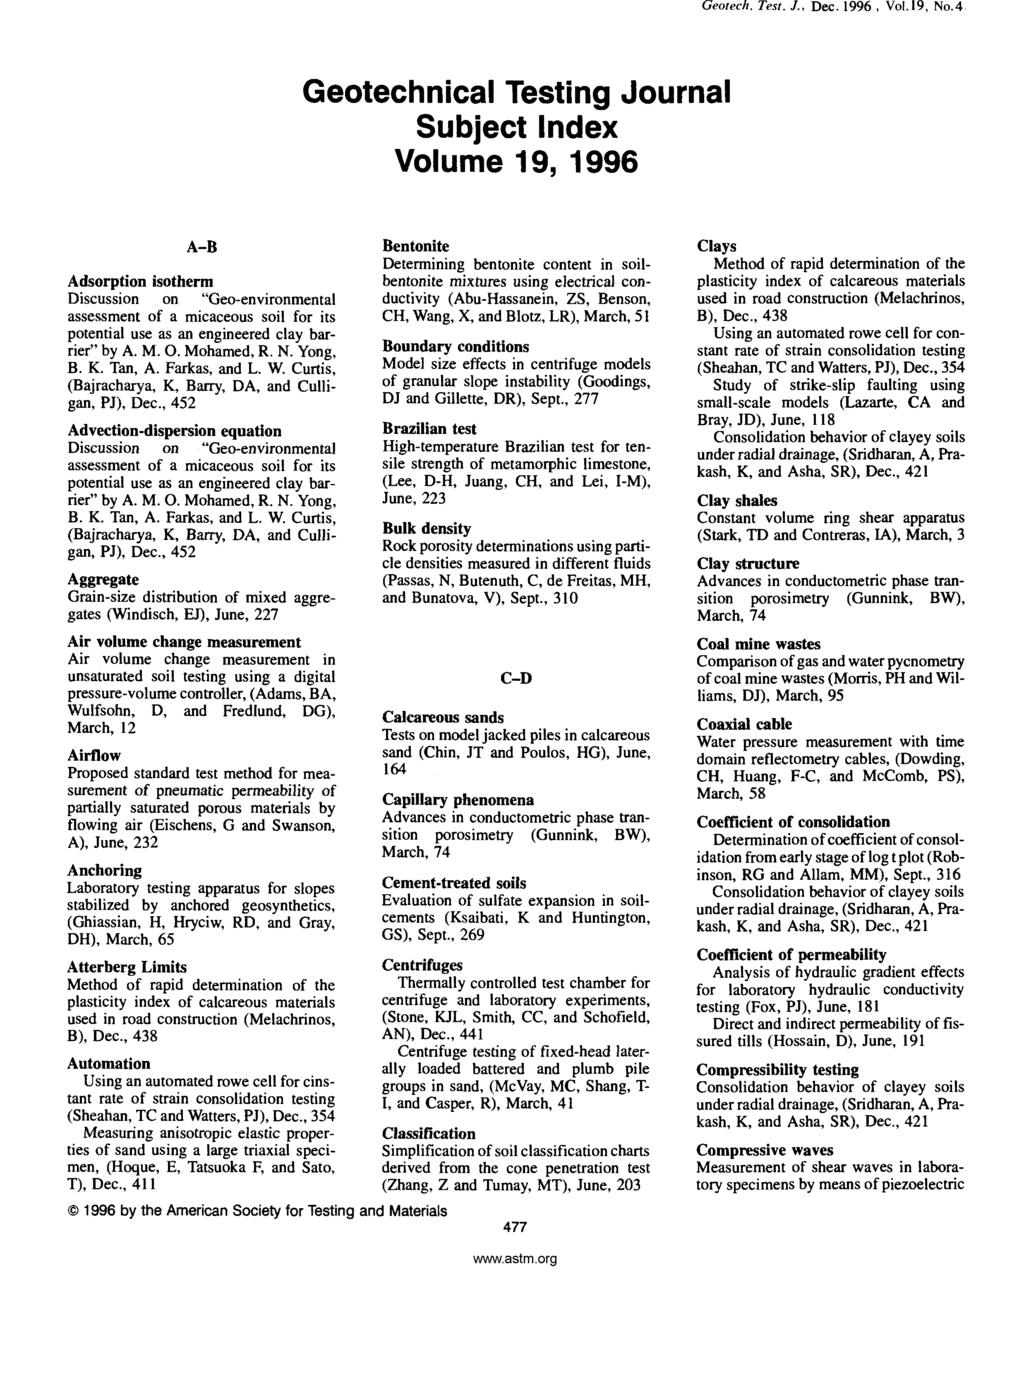 Geotechnical Testing Journal Subject Index Volume 19, 1996 A-B Adsorption isotherm Discussion on "Geo-environmental assessment of a micaceous soil for its potential use as an engineered clay barrier"